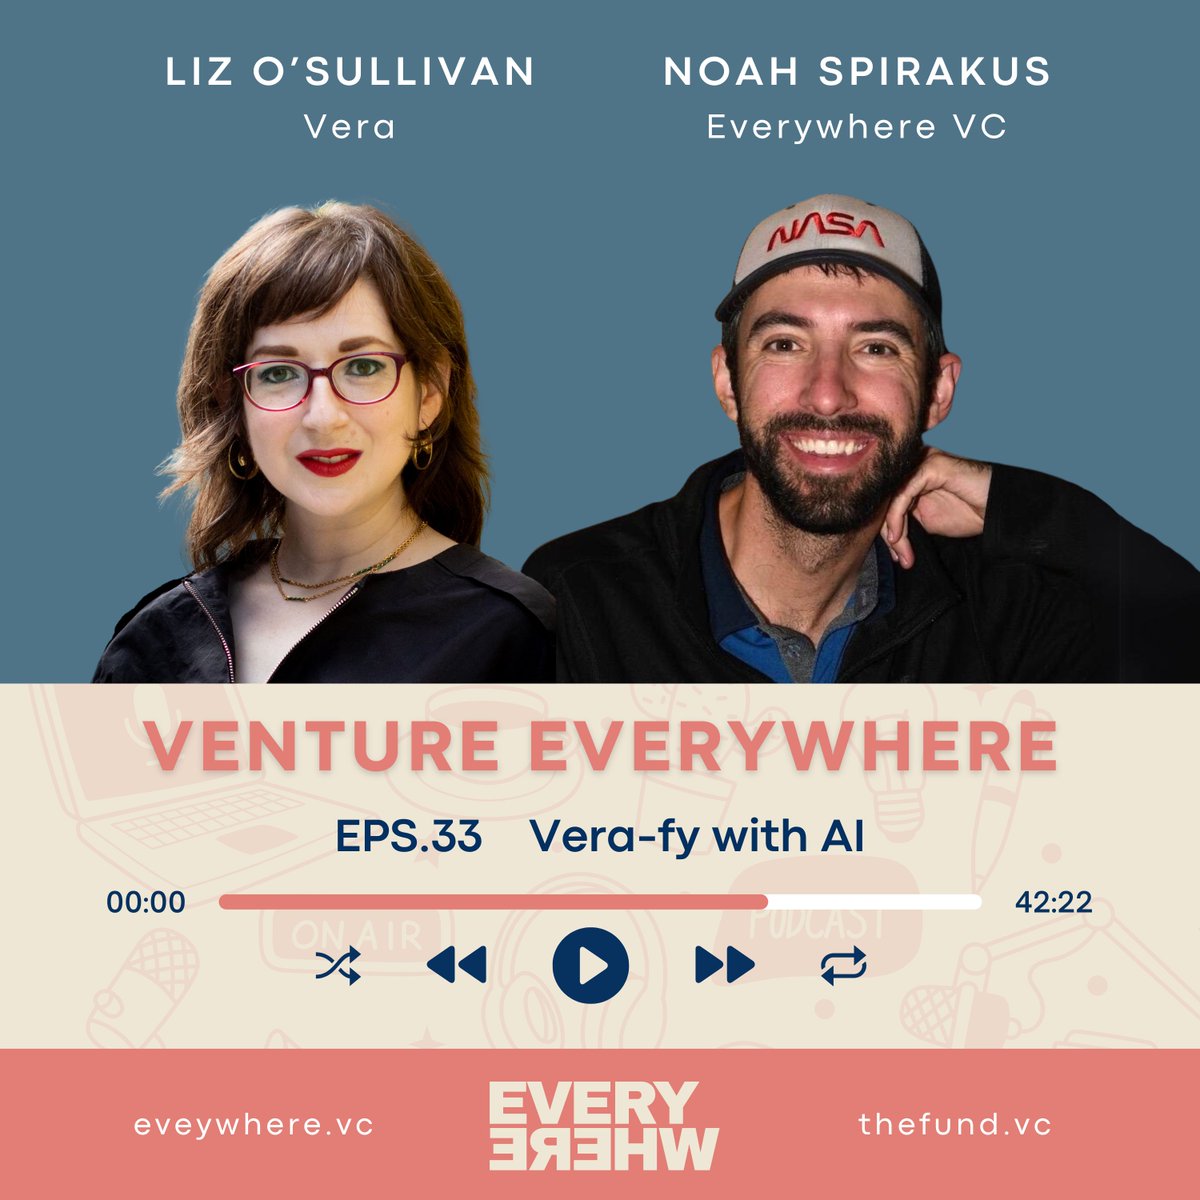 ON AIR: Venture Everywhere #Podcast EPS 33🎙️ Vera-fy with AI featuring @noahjs, Partner & LP of @EverywhereVC & @lizjosullivan, CEO of @AskVeraIO. 🎧Listen: 🍎 Apple: podcasts.apple.com/us/podcast/ver… 💚 Spotify: open.spotify.com/episode/0Ctzgu… 🗒️ Transcript at ideas.everywhere.vc/s/podcast